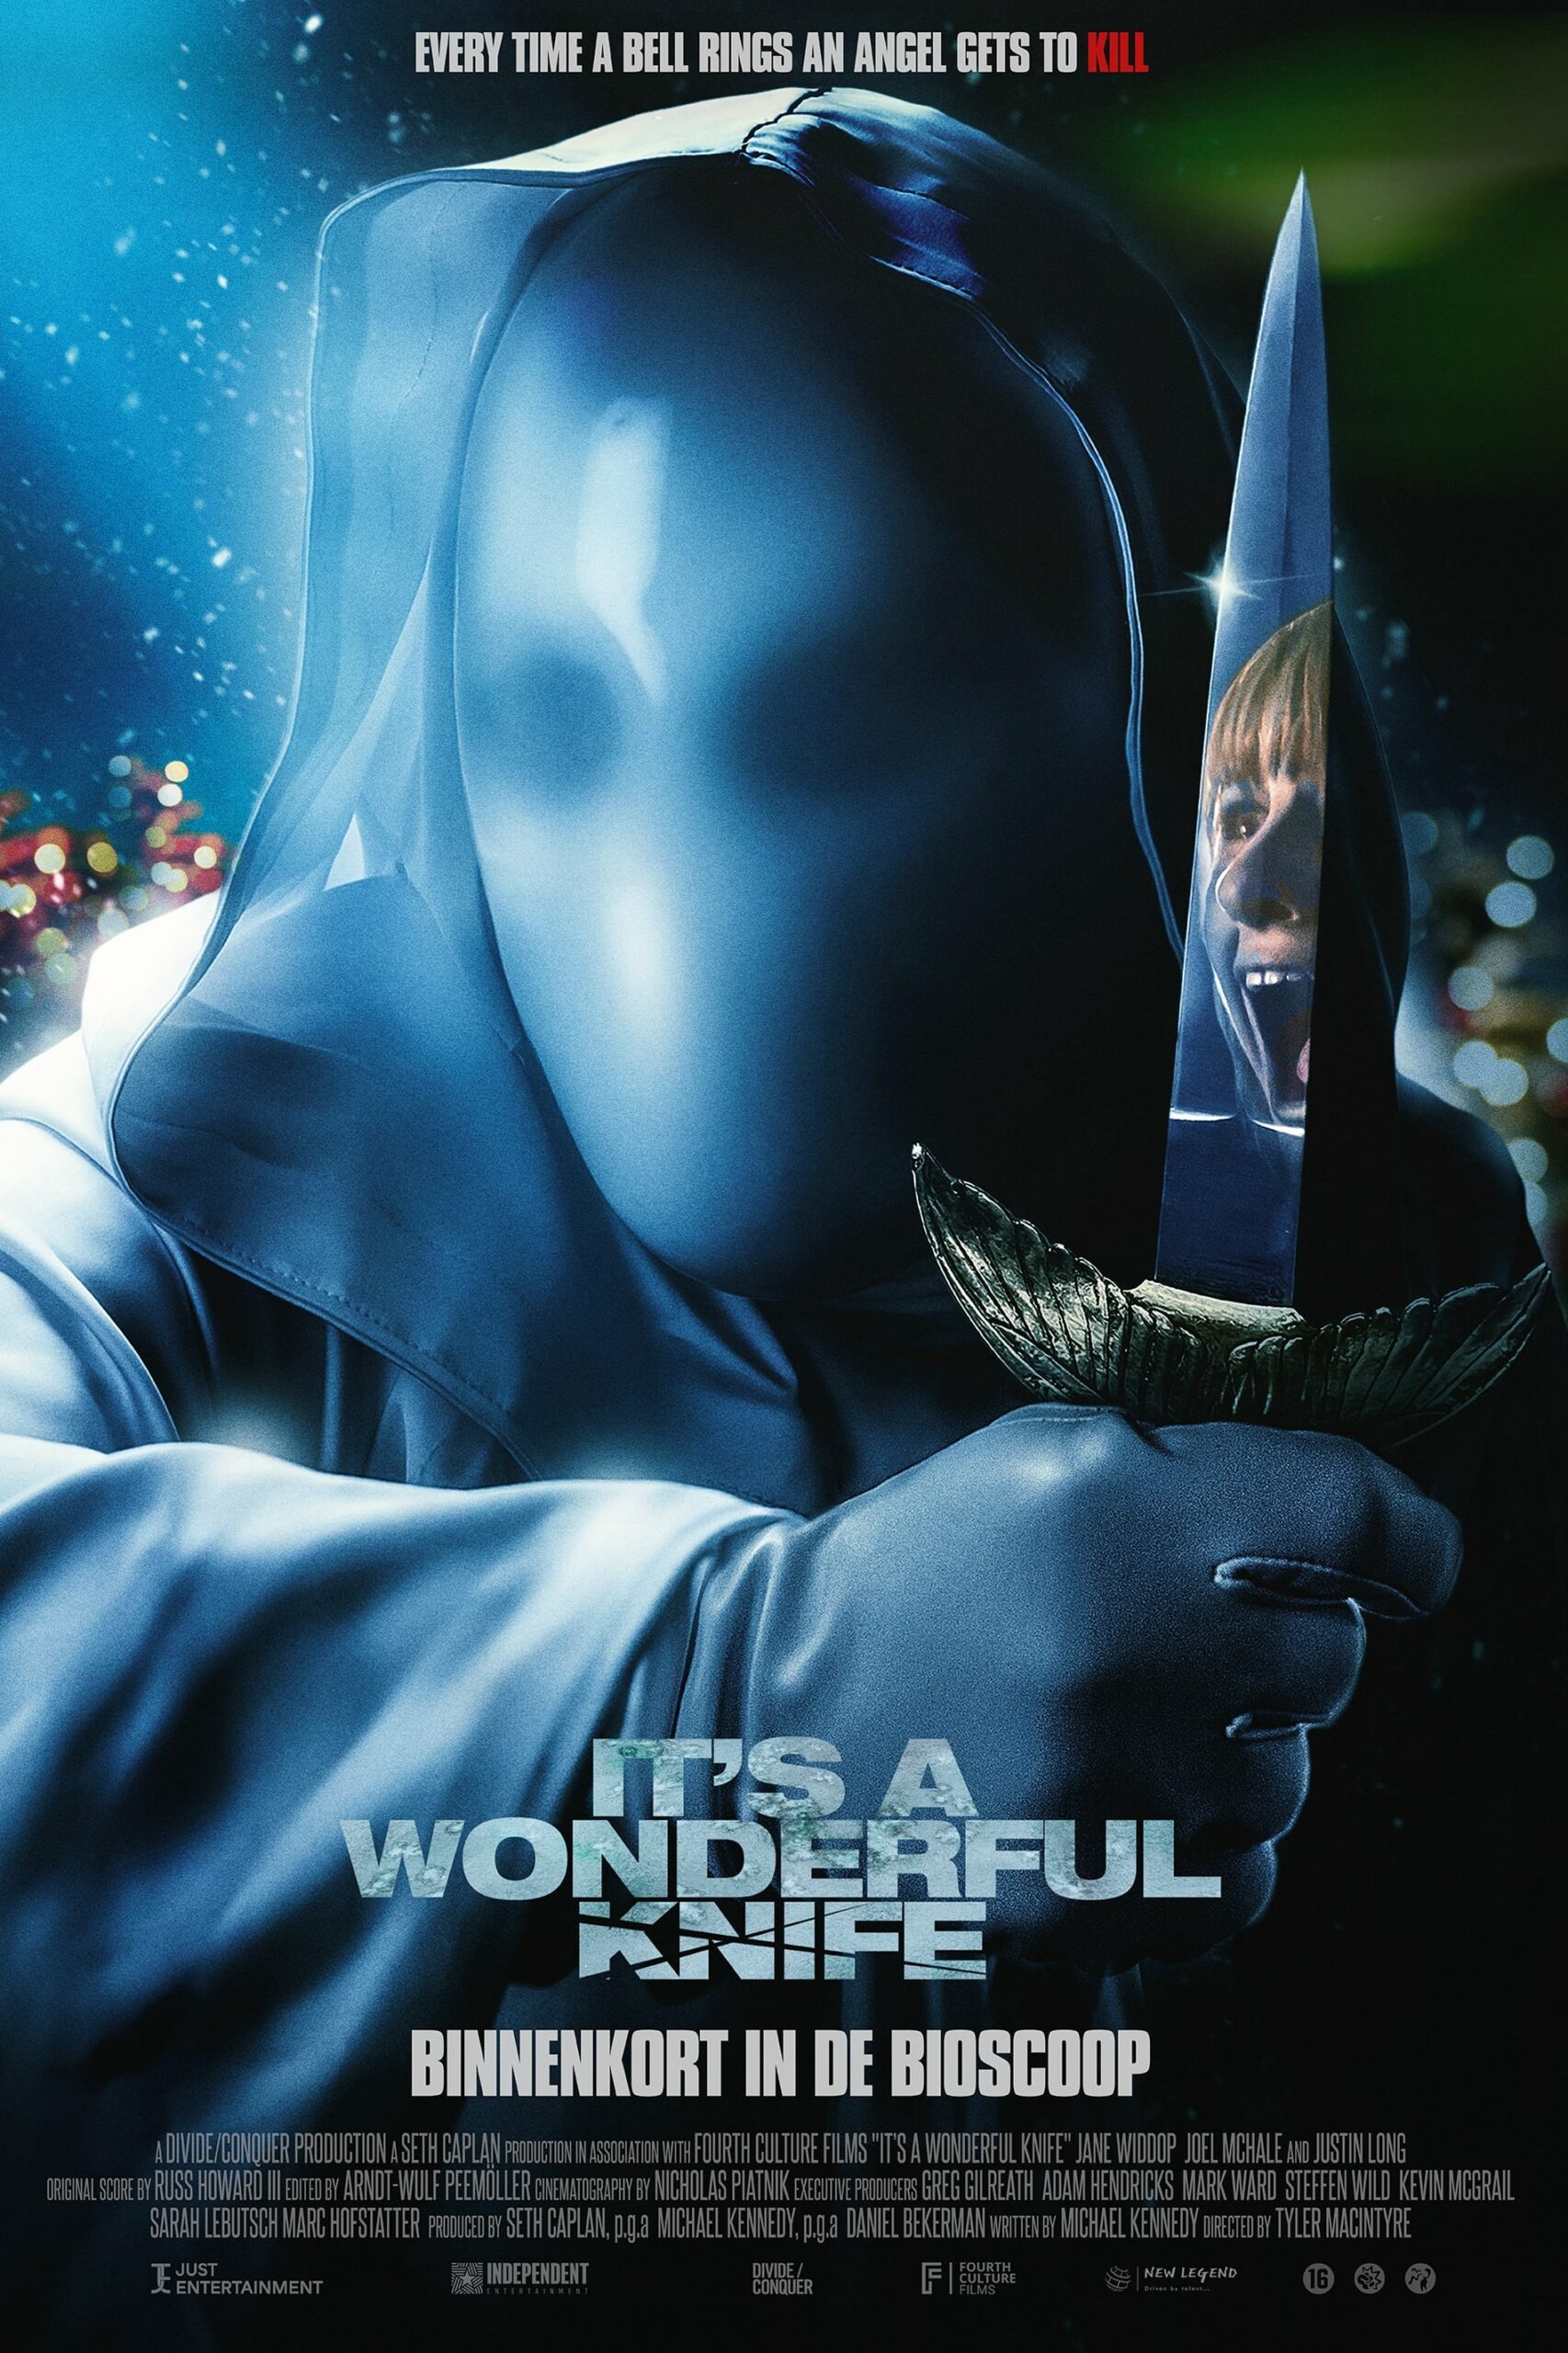 Poster for the movie "It's a Wonderful Knife"